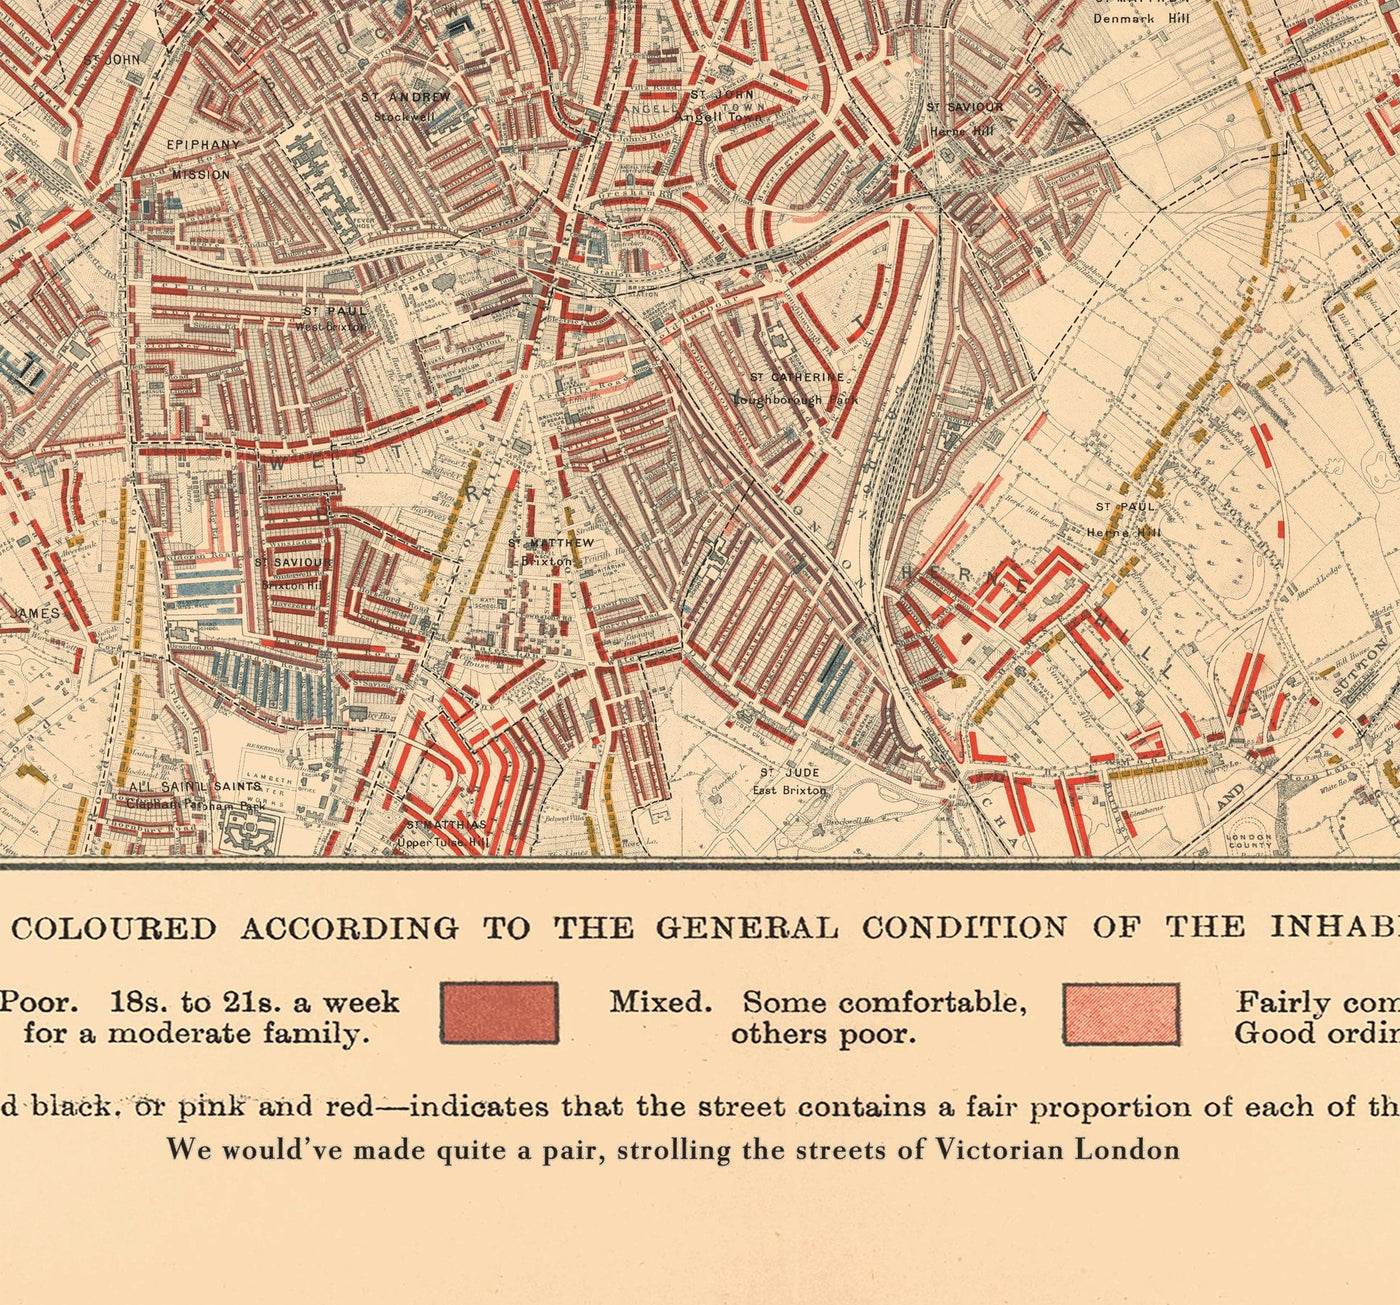 Map of London Poverty 1898-9, West Central District, by Charles Booth - Westminster, Camden, City of London, Islington - W1, WC1, WC2, EC1, N1